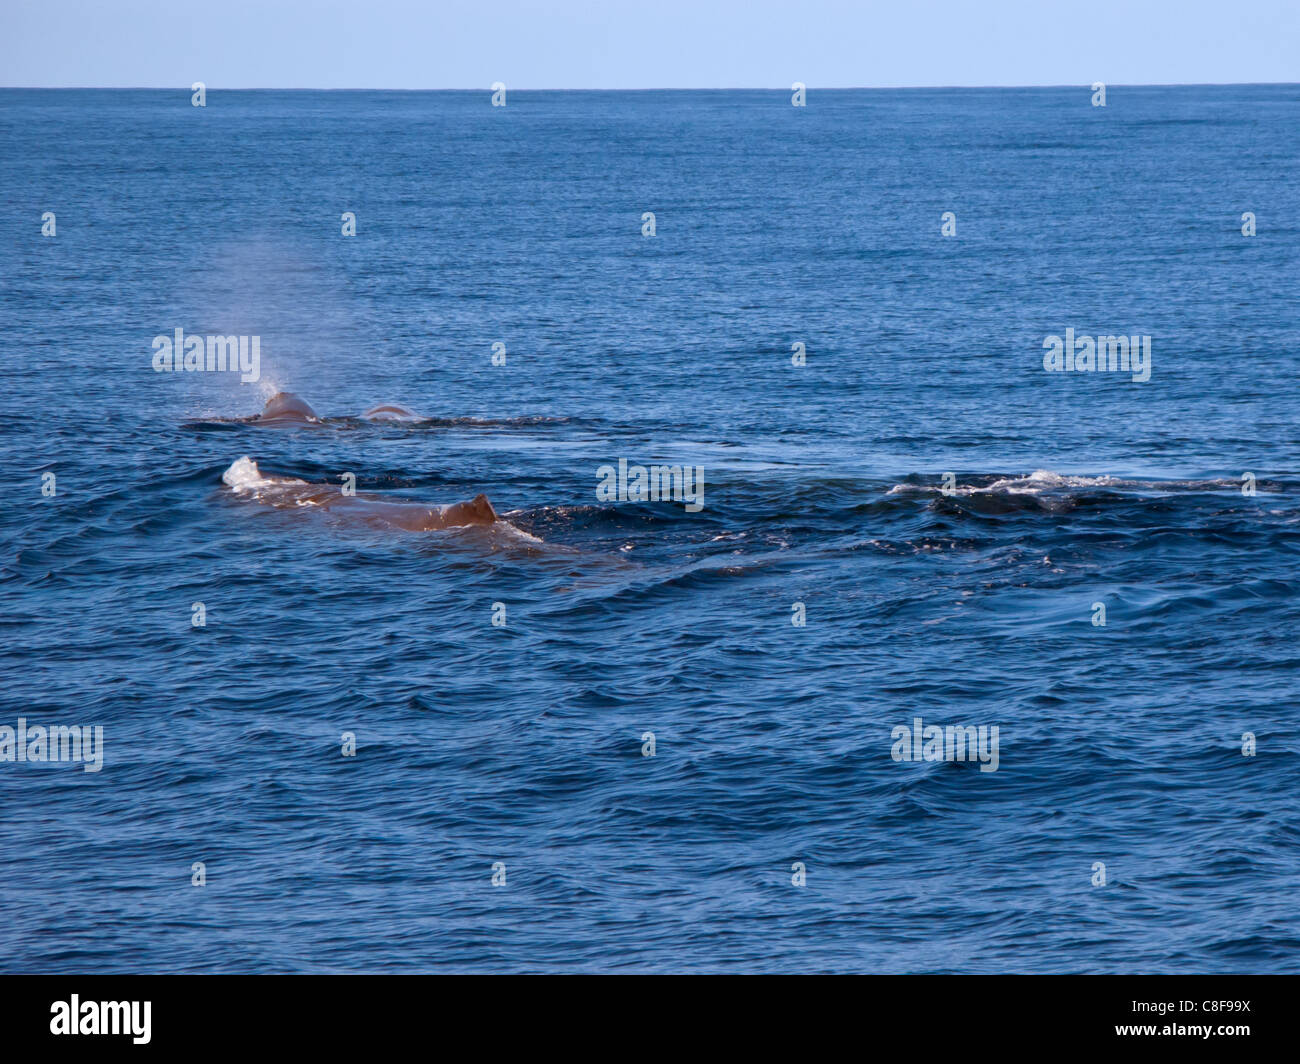 Sperm whales in the Atlantic ocean outside São Miguel island, the Azores. Stock Photo